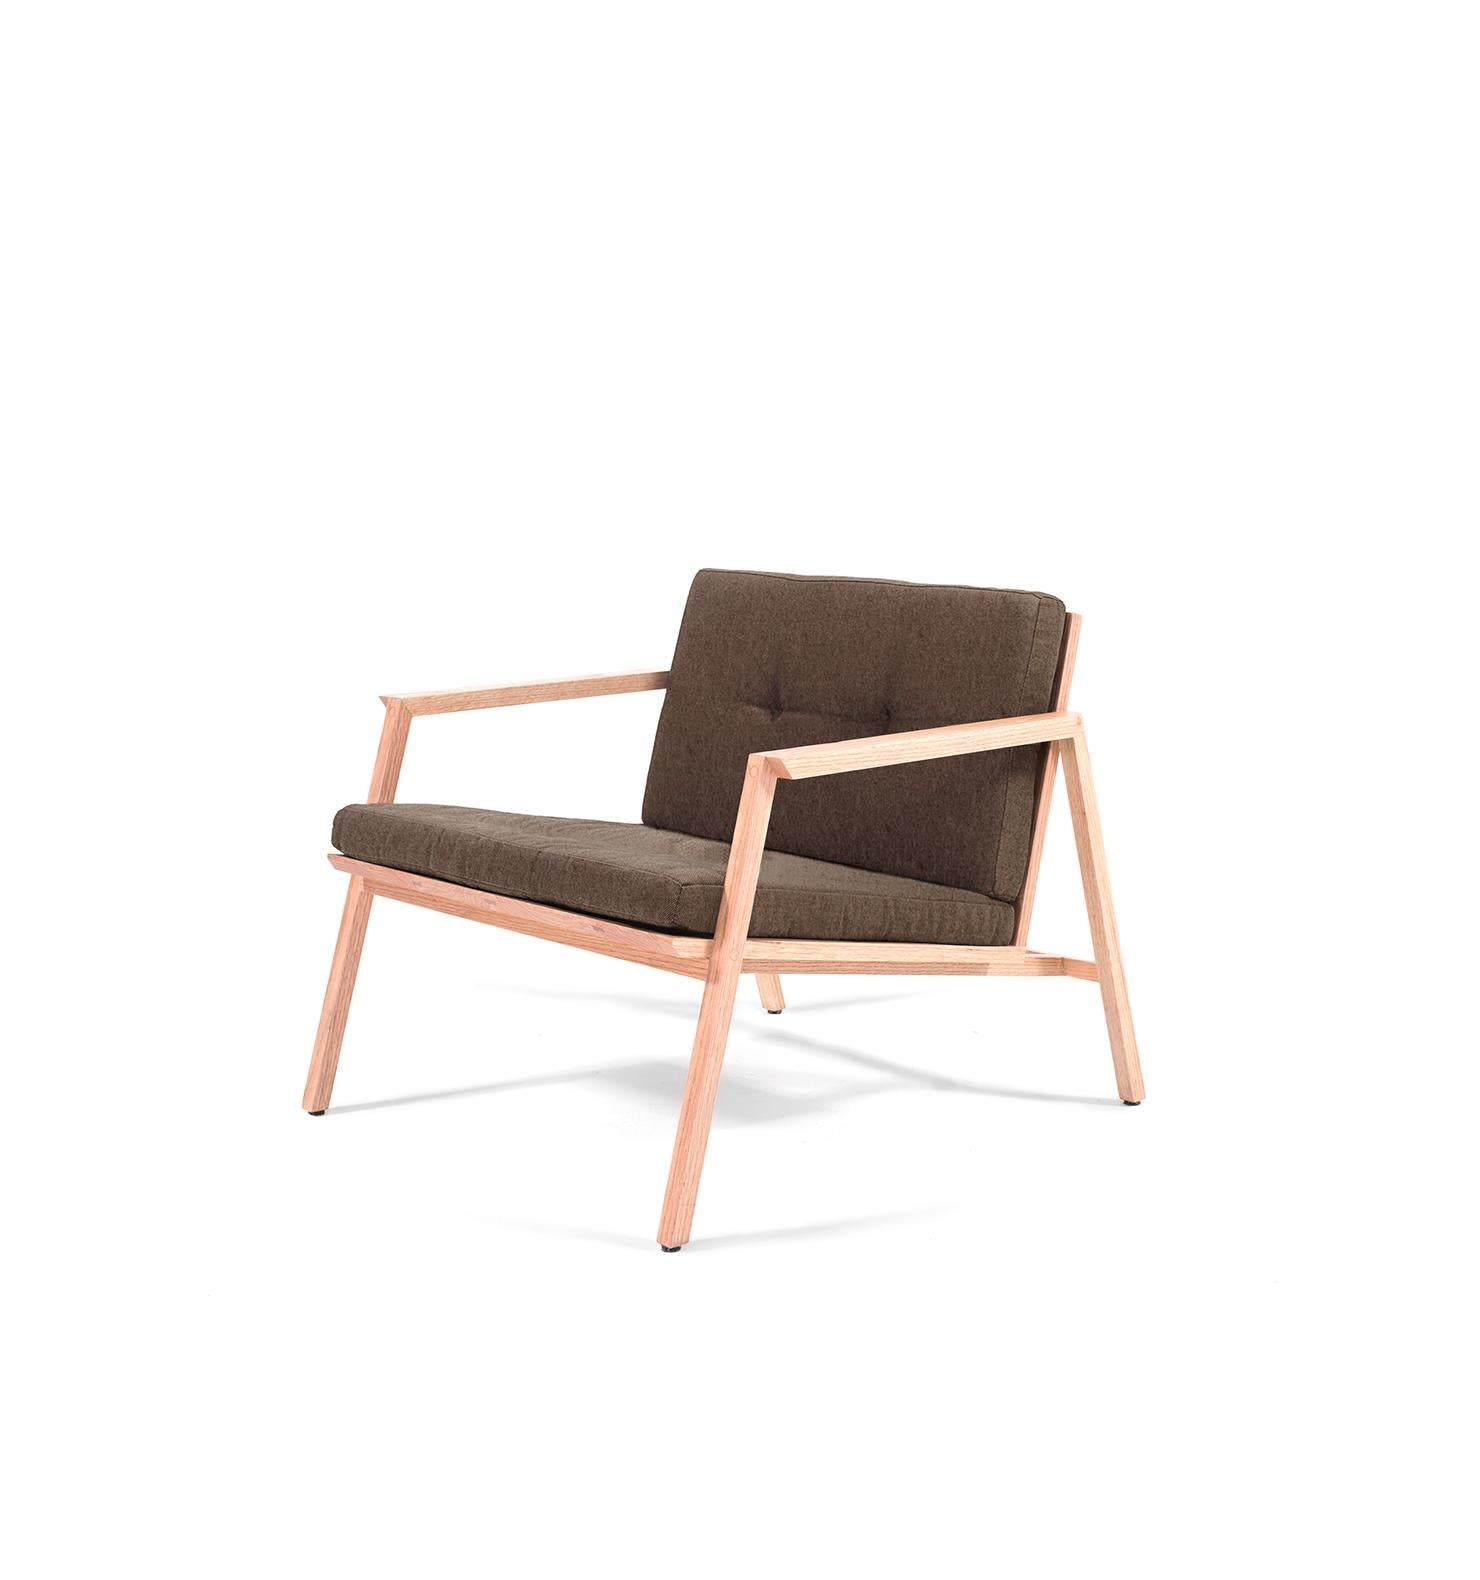 Tumbona Dedo, Mexican Contemporary Lounge Chair by Emiliano Molina for CUCHARA For Sale 4